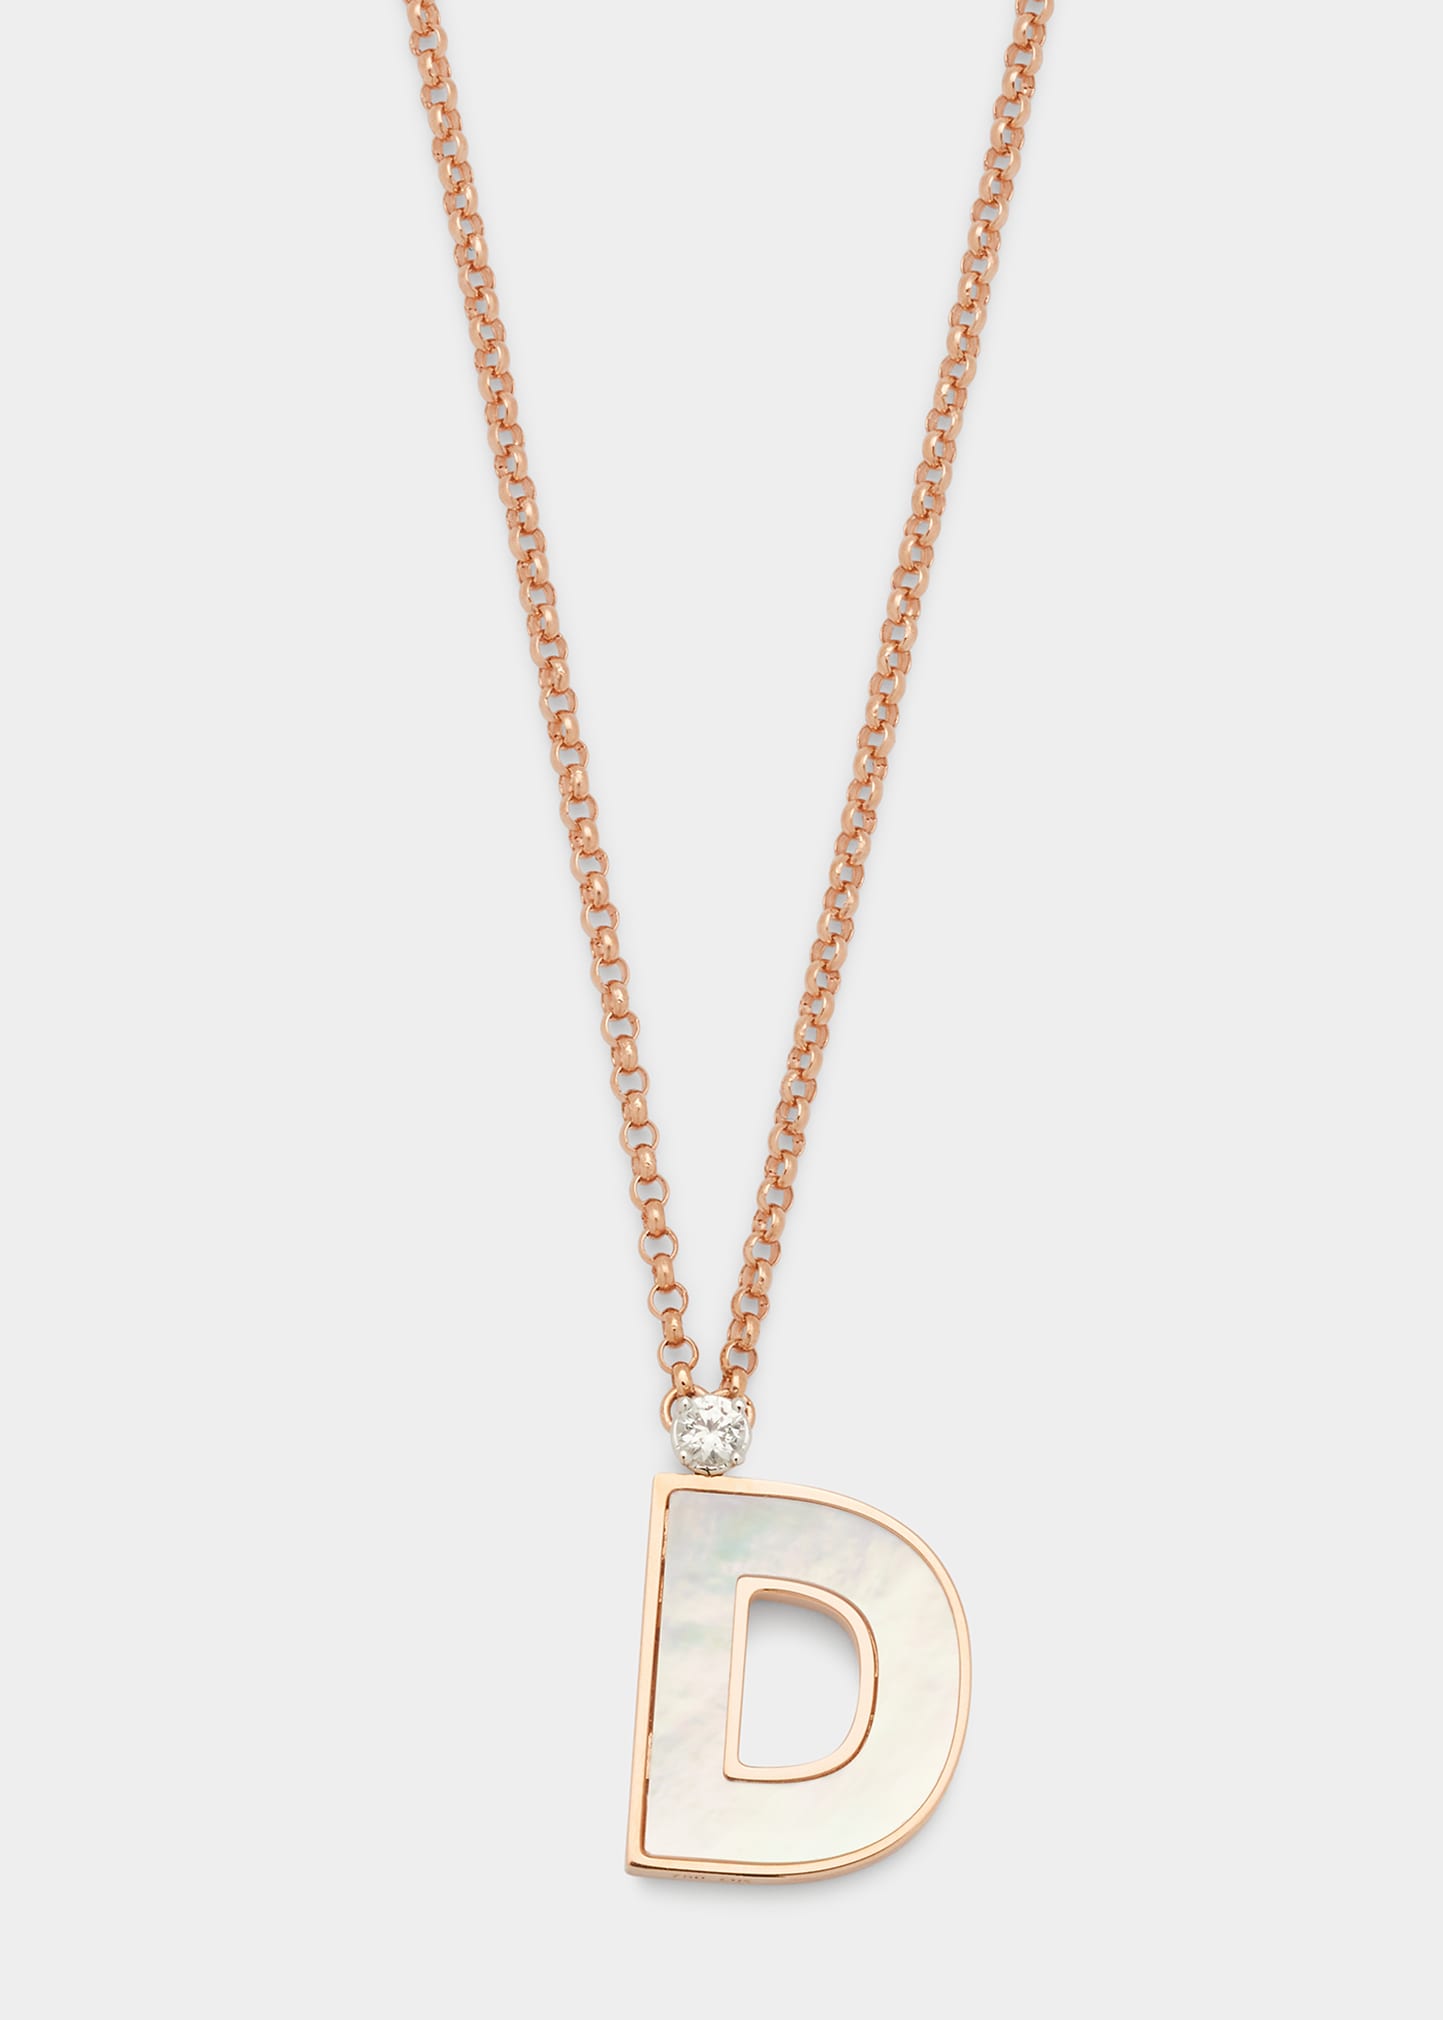 Rose Gold 'D' Letter Charm Necklace with Mother-of-Pearl and White Sapphire